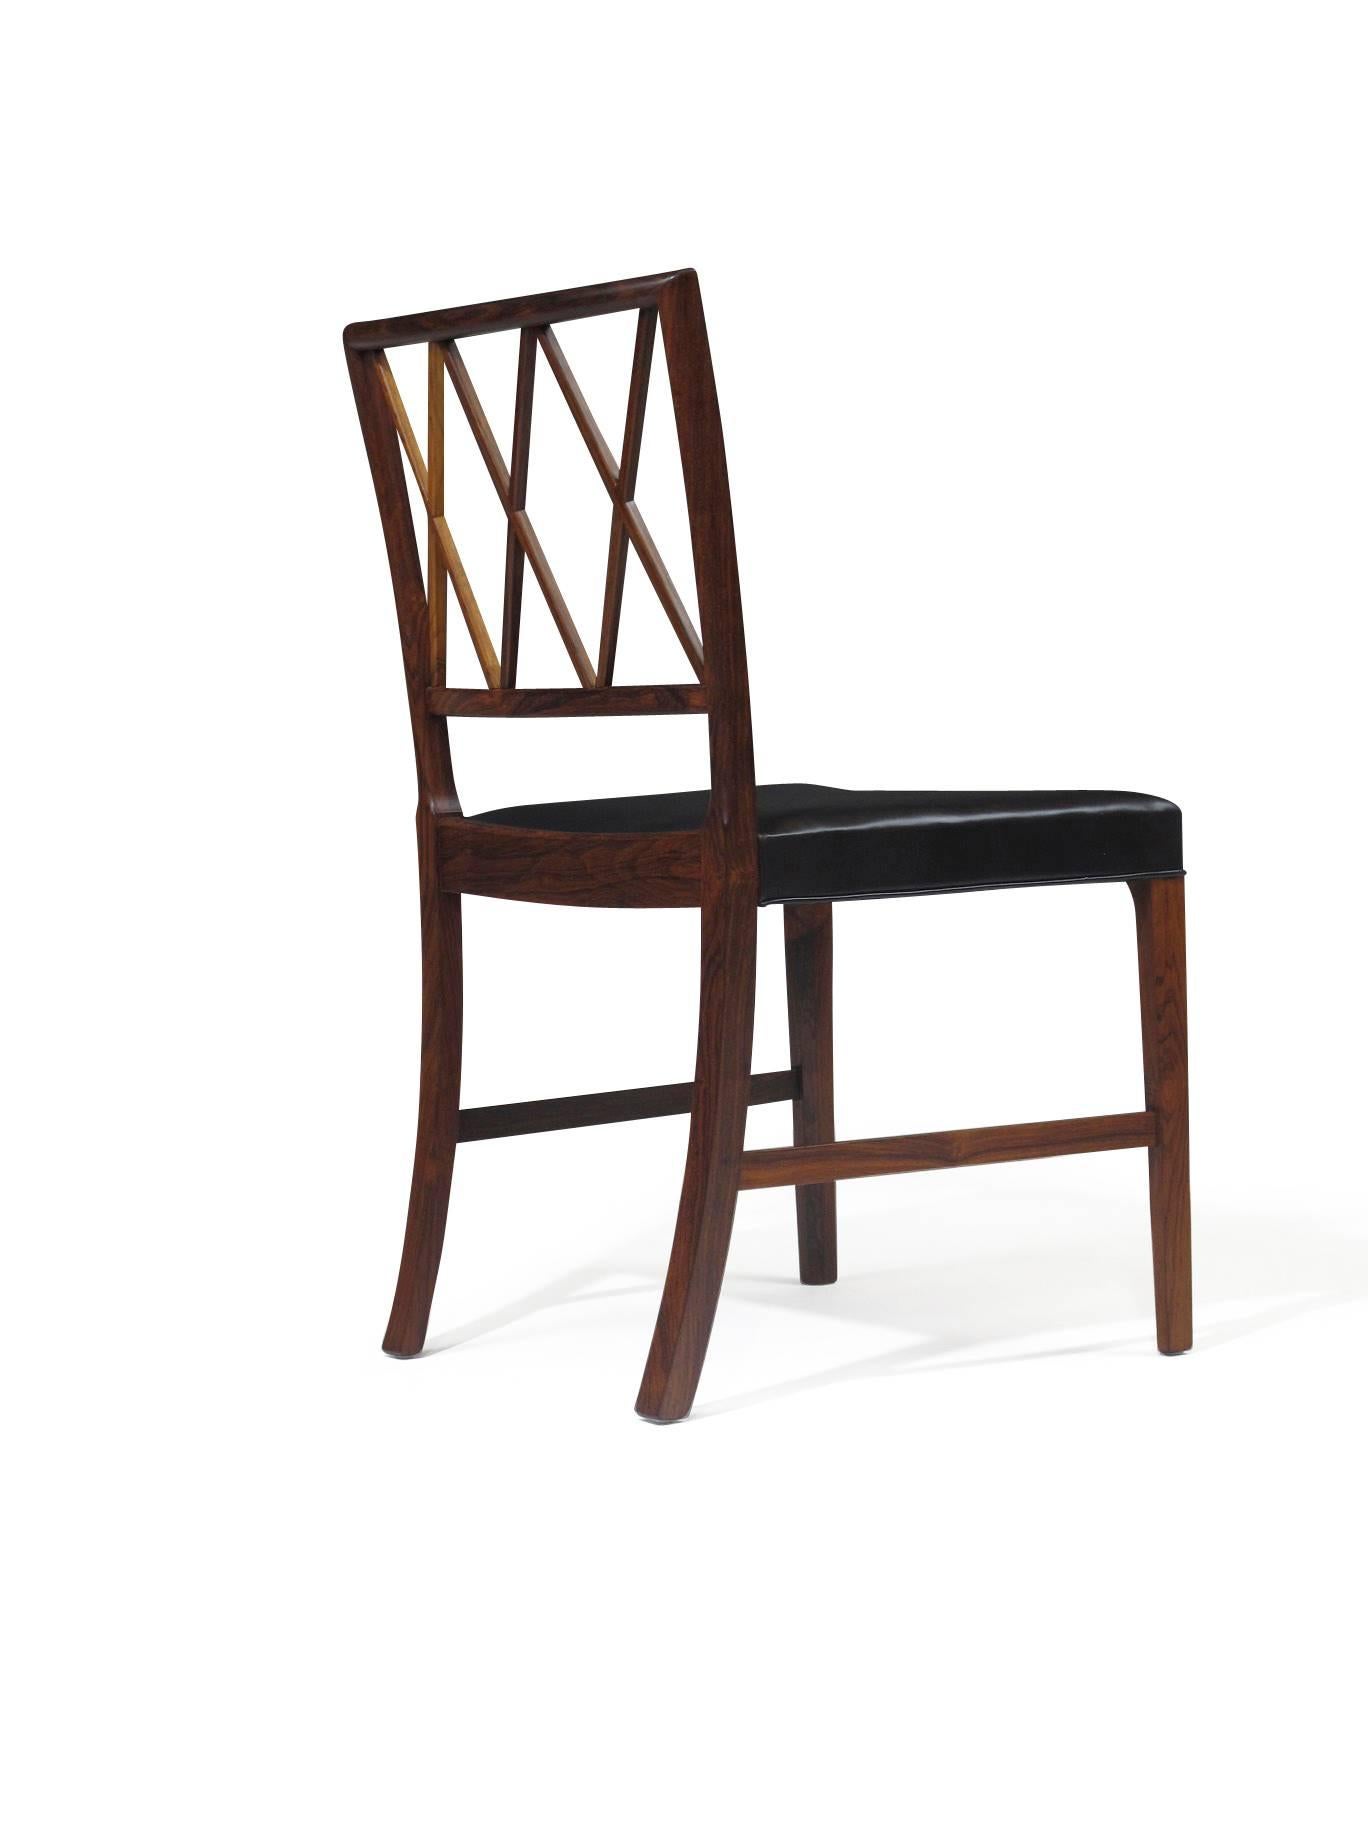 Six Brazilian rosewood dining chairs designed by Ole Wanscher for A.J. Iversen in 1942. Perfectly restored and upholstered in fine black leather.